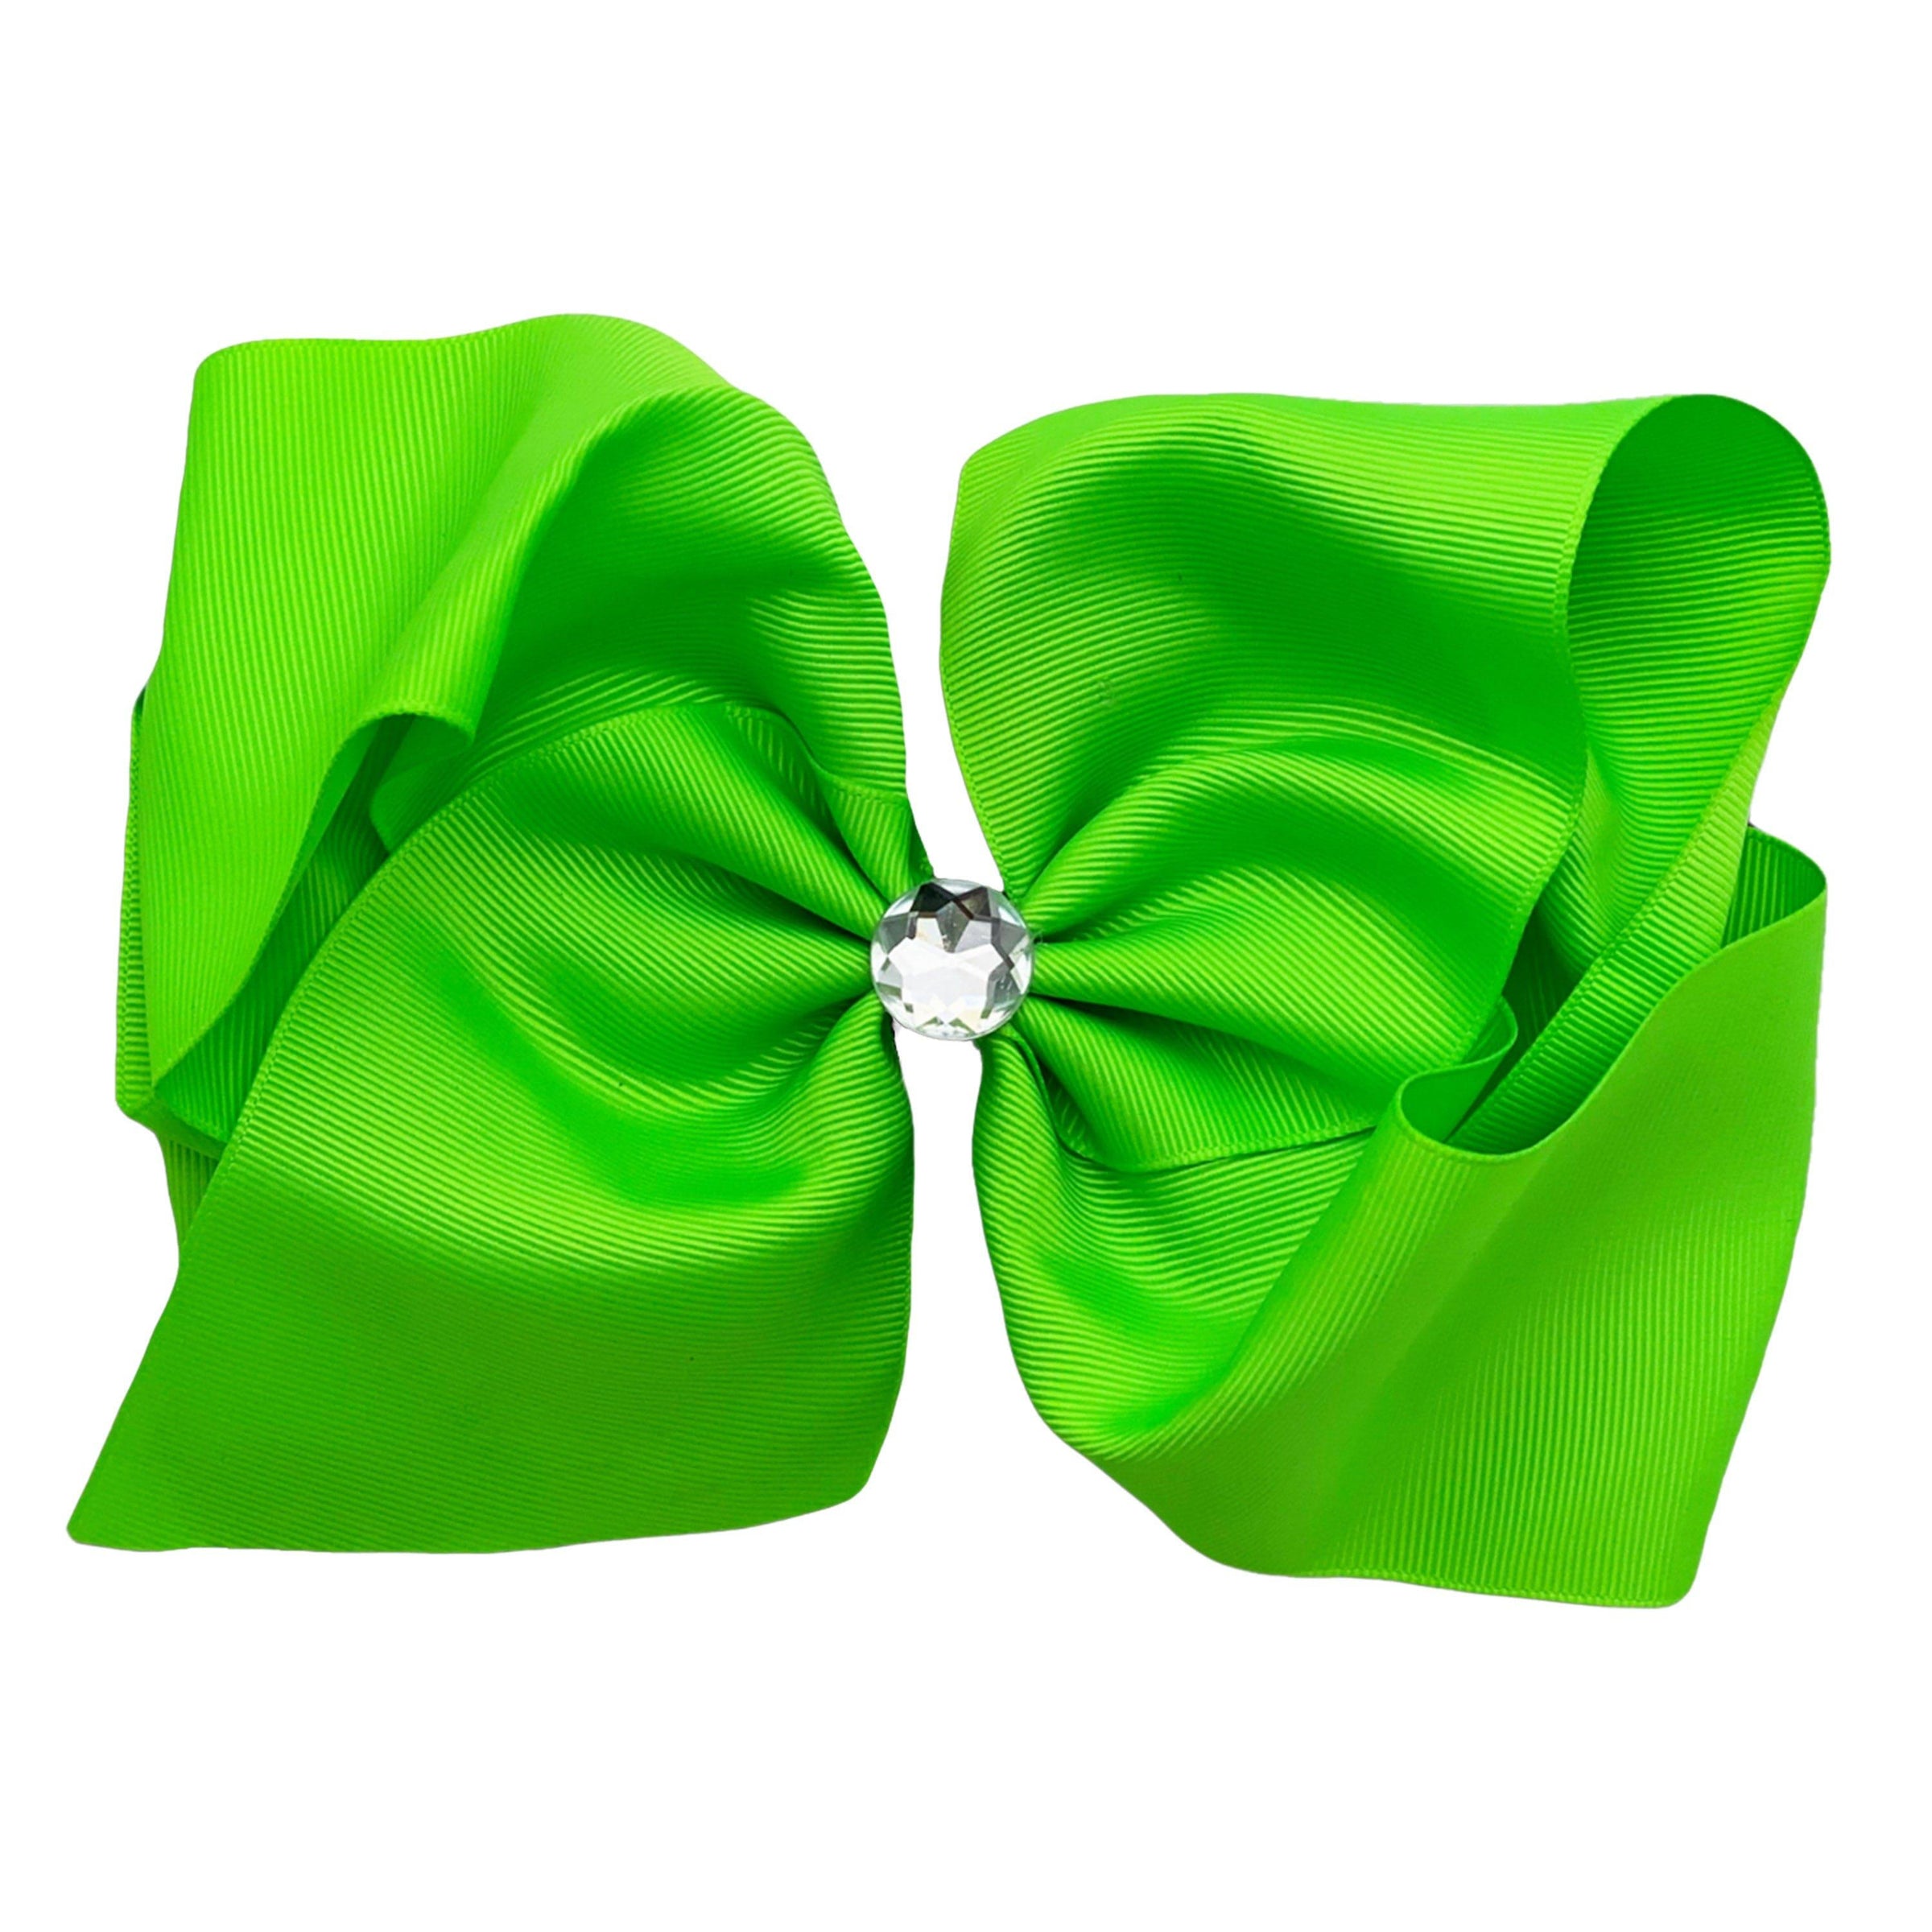 Wholesale Boutique Light Green Hair Bow